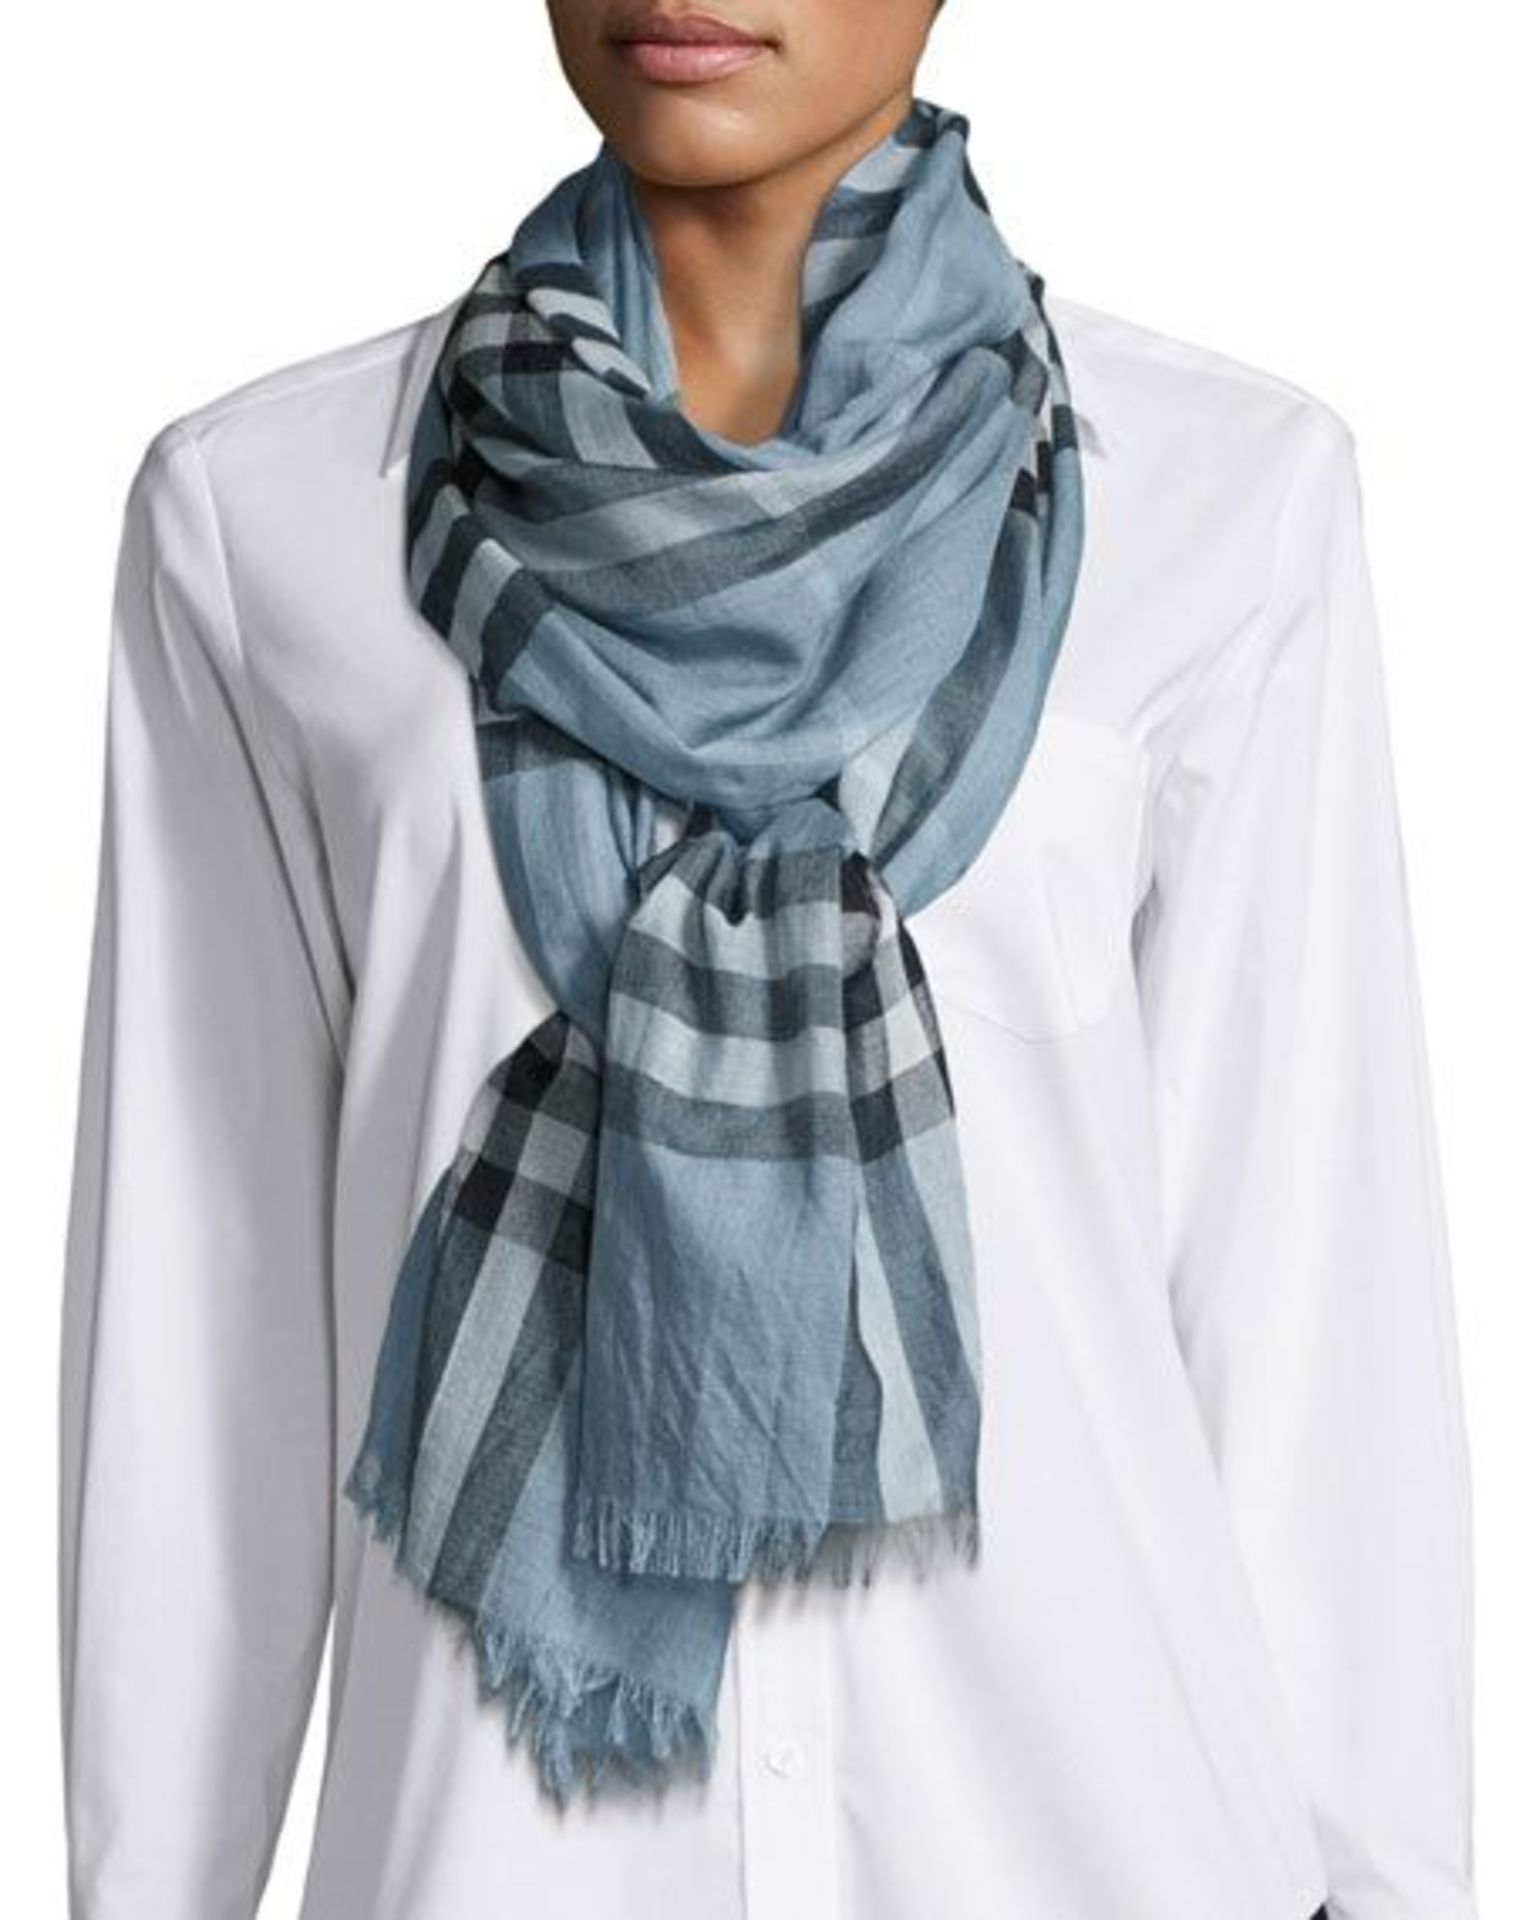 Genuine Burberry Light Blue Check scarf. RRP £250. Wool and Silk Scarf. - Image 2 of 4